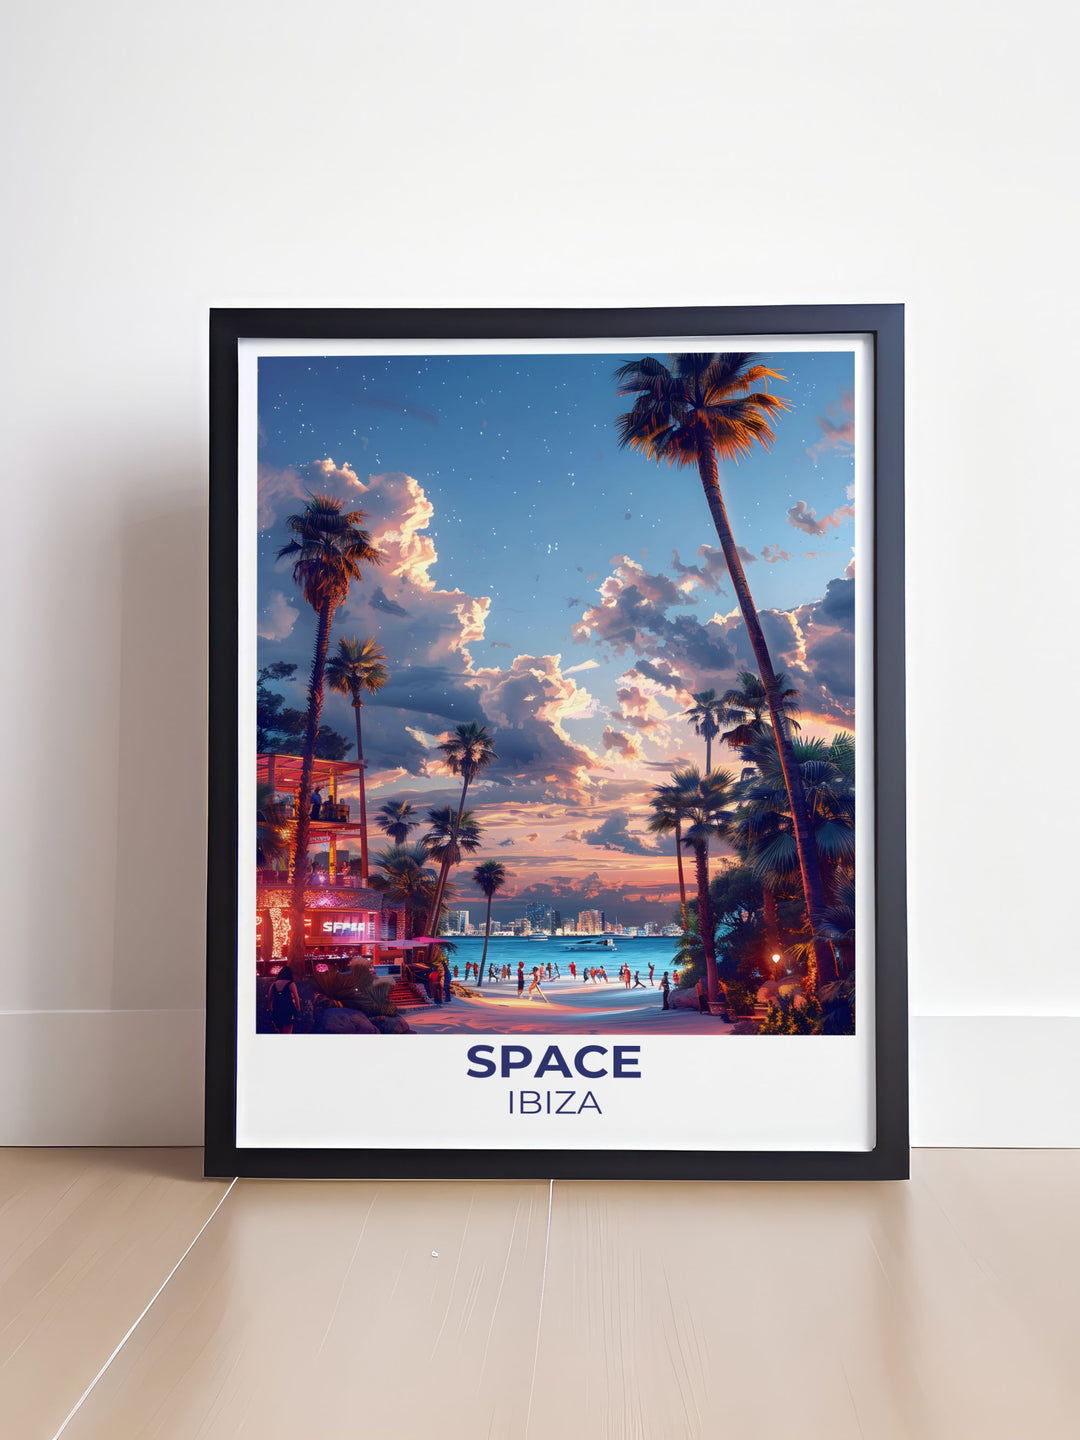 The Terrace Wall Art showcases the vibrant ambiance of Space Nightclub in Ibiza, with colorful lights illuminating the crowd. This artwork brings the electrifying atmosphere of one of the islands most famous dance floors into your home.